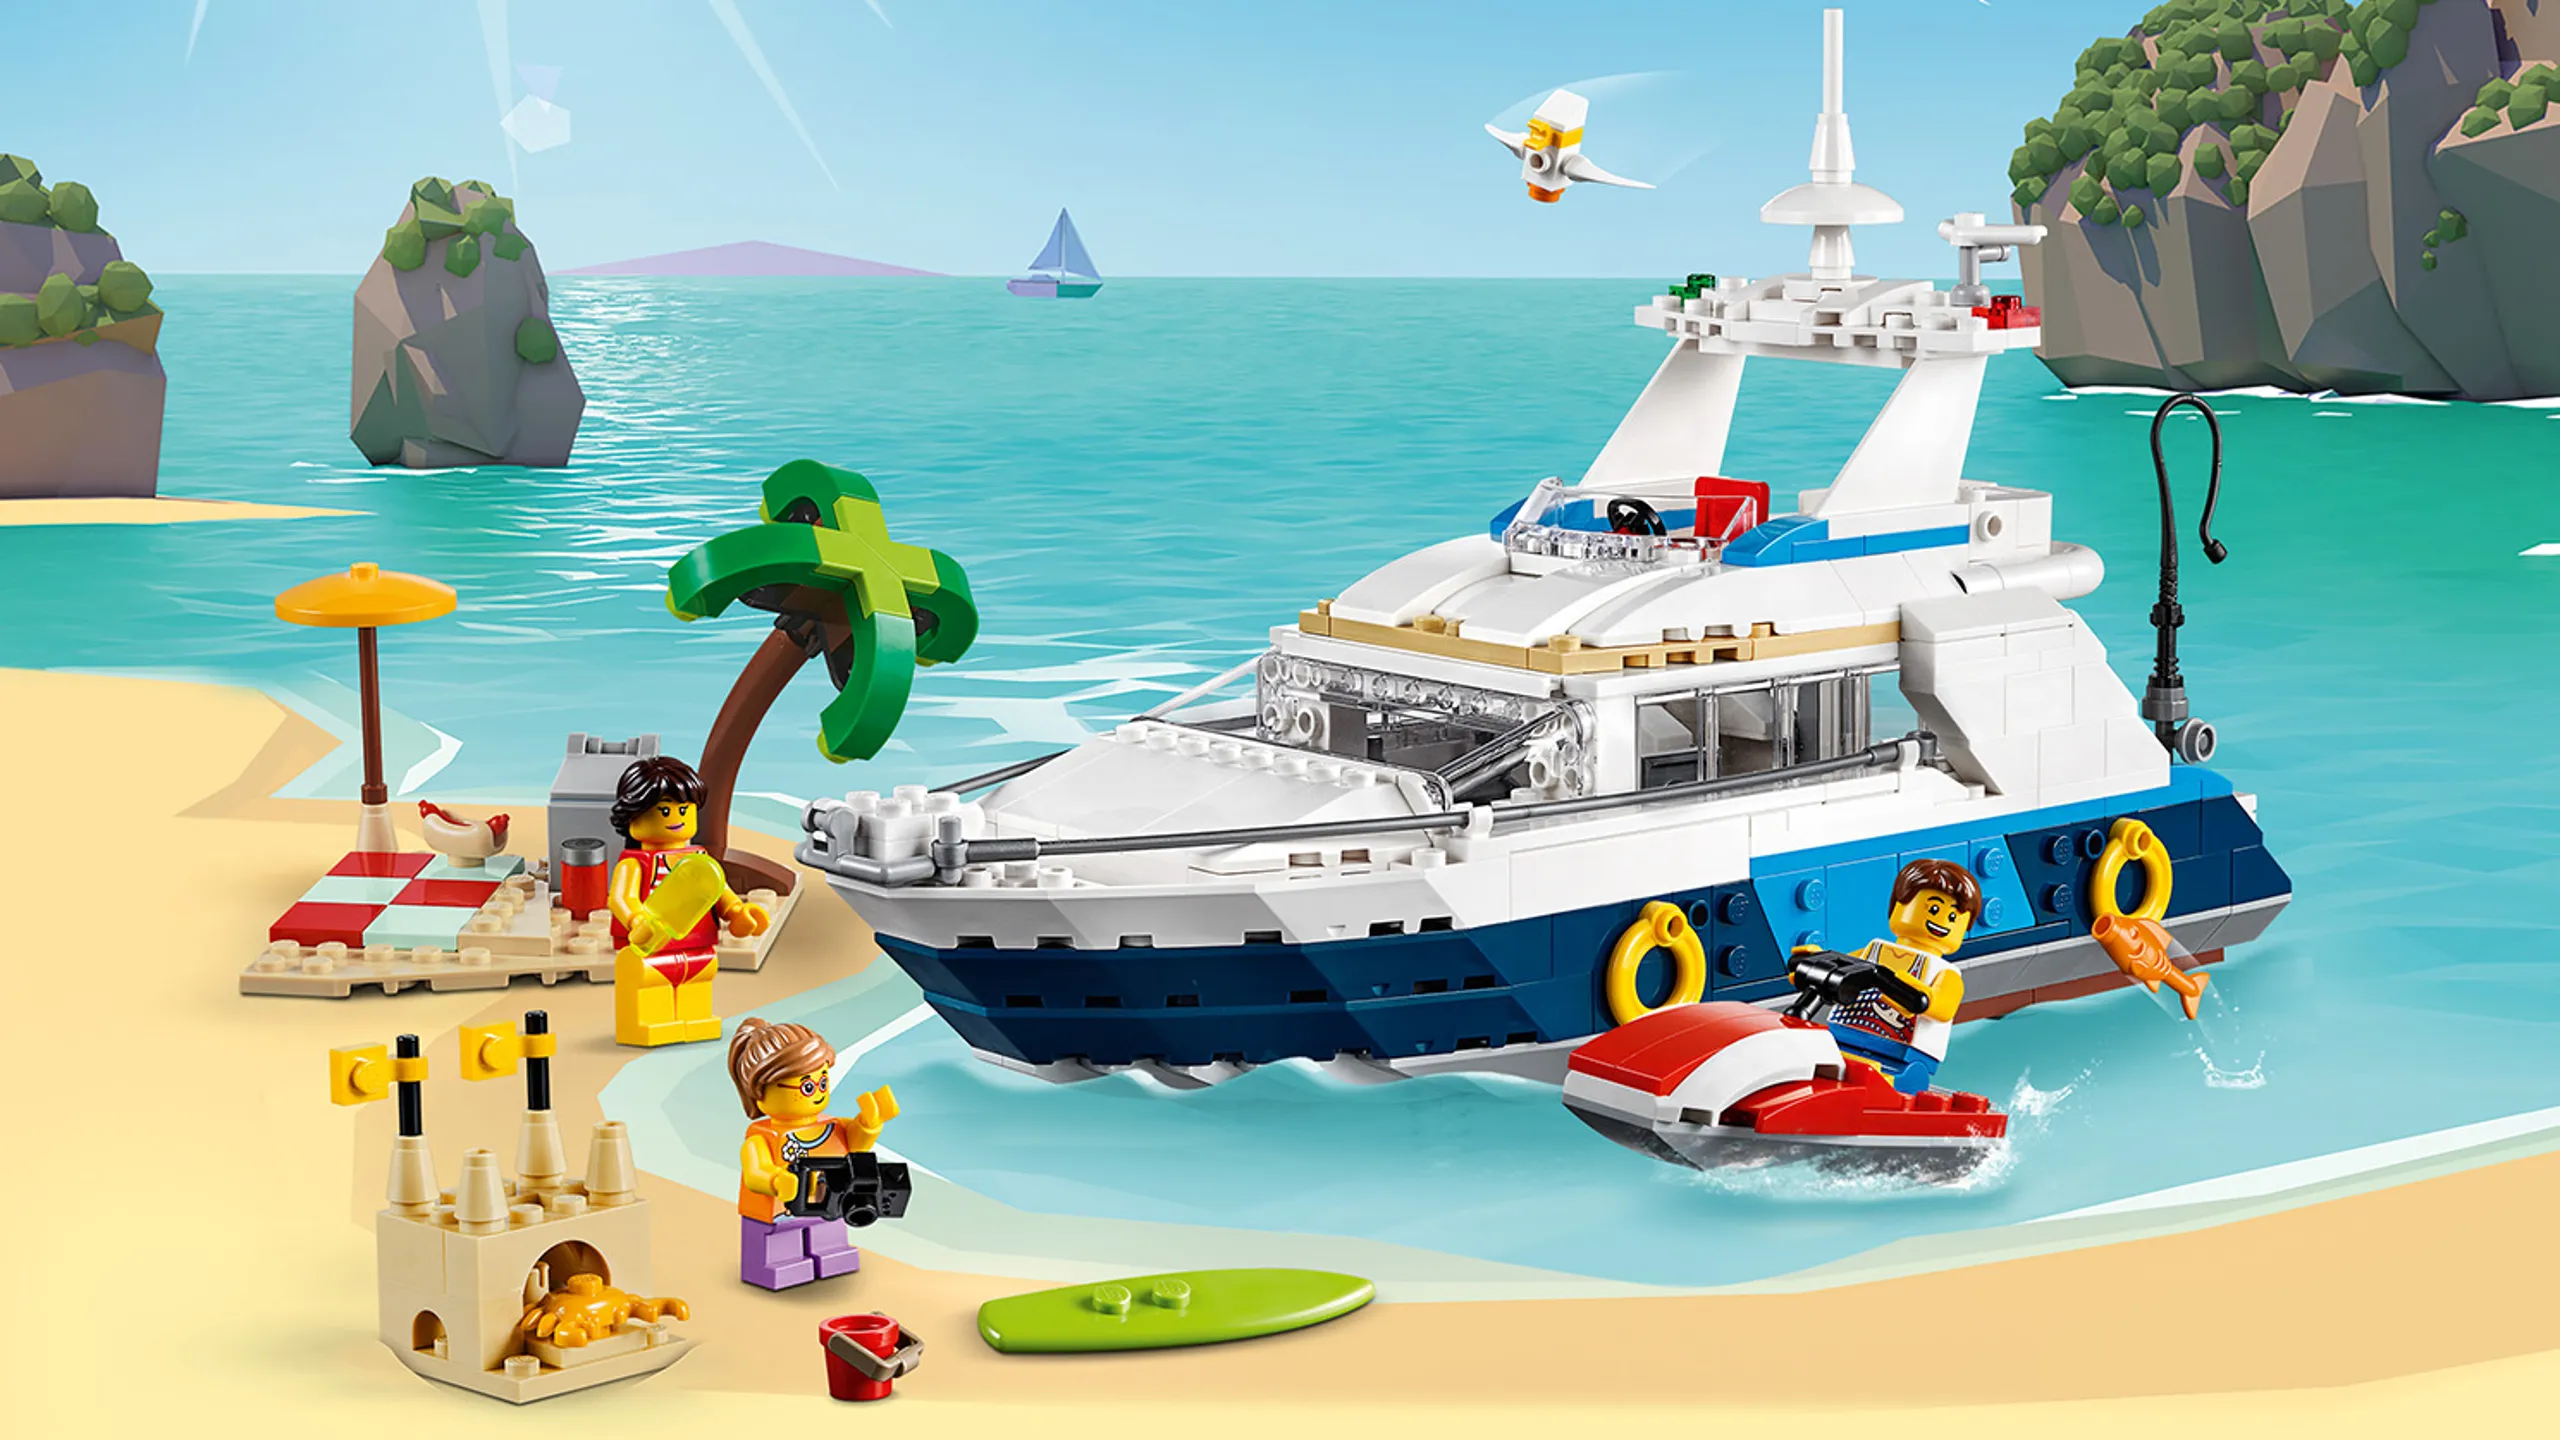 LEGO Creator 3 in 1 - 31083 Cruising Adventures - Build a yacht and hang out on the beach and enjoy the sun, surf or build a sand castle.